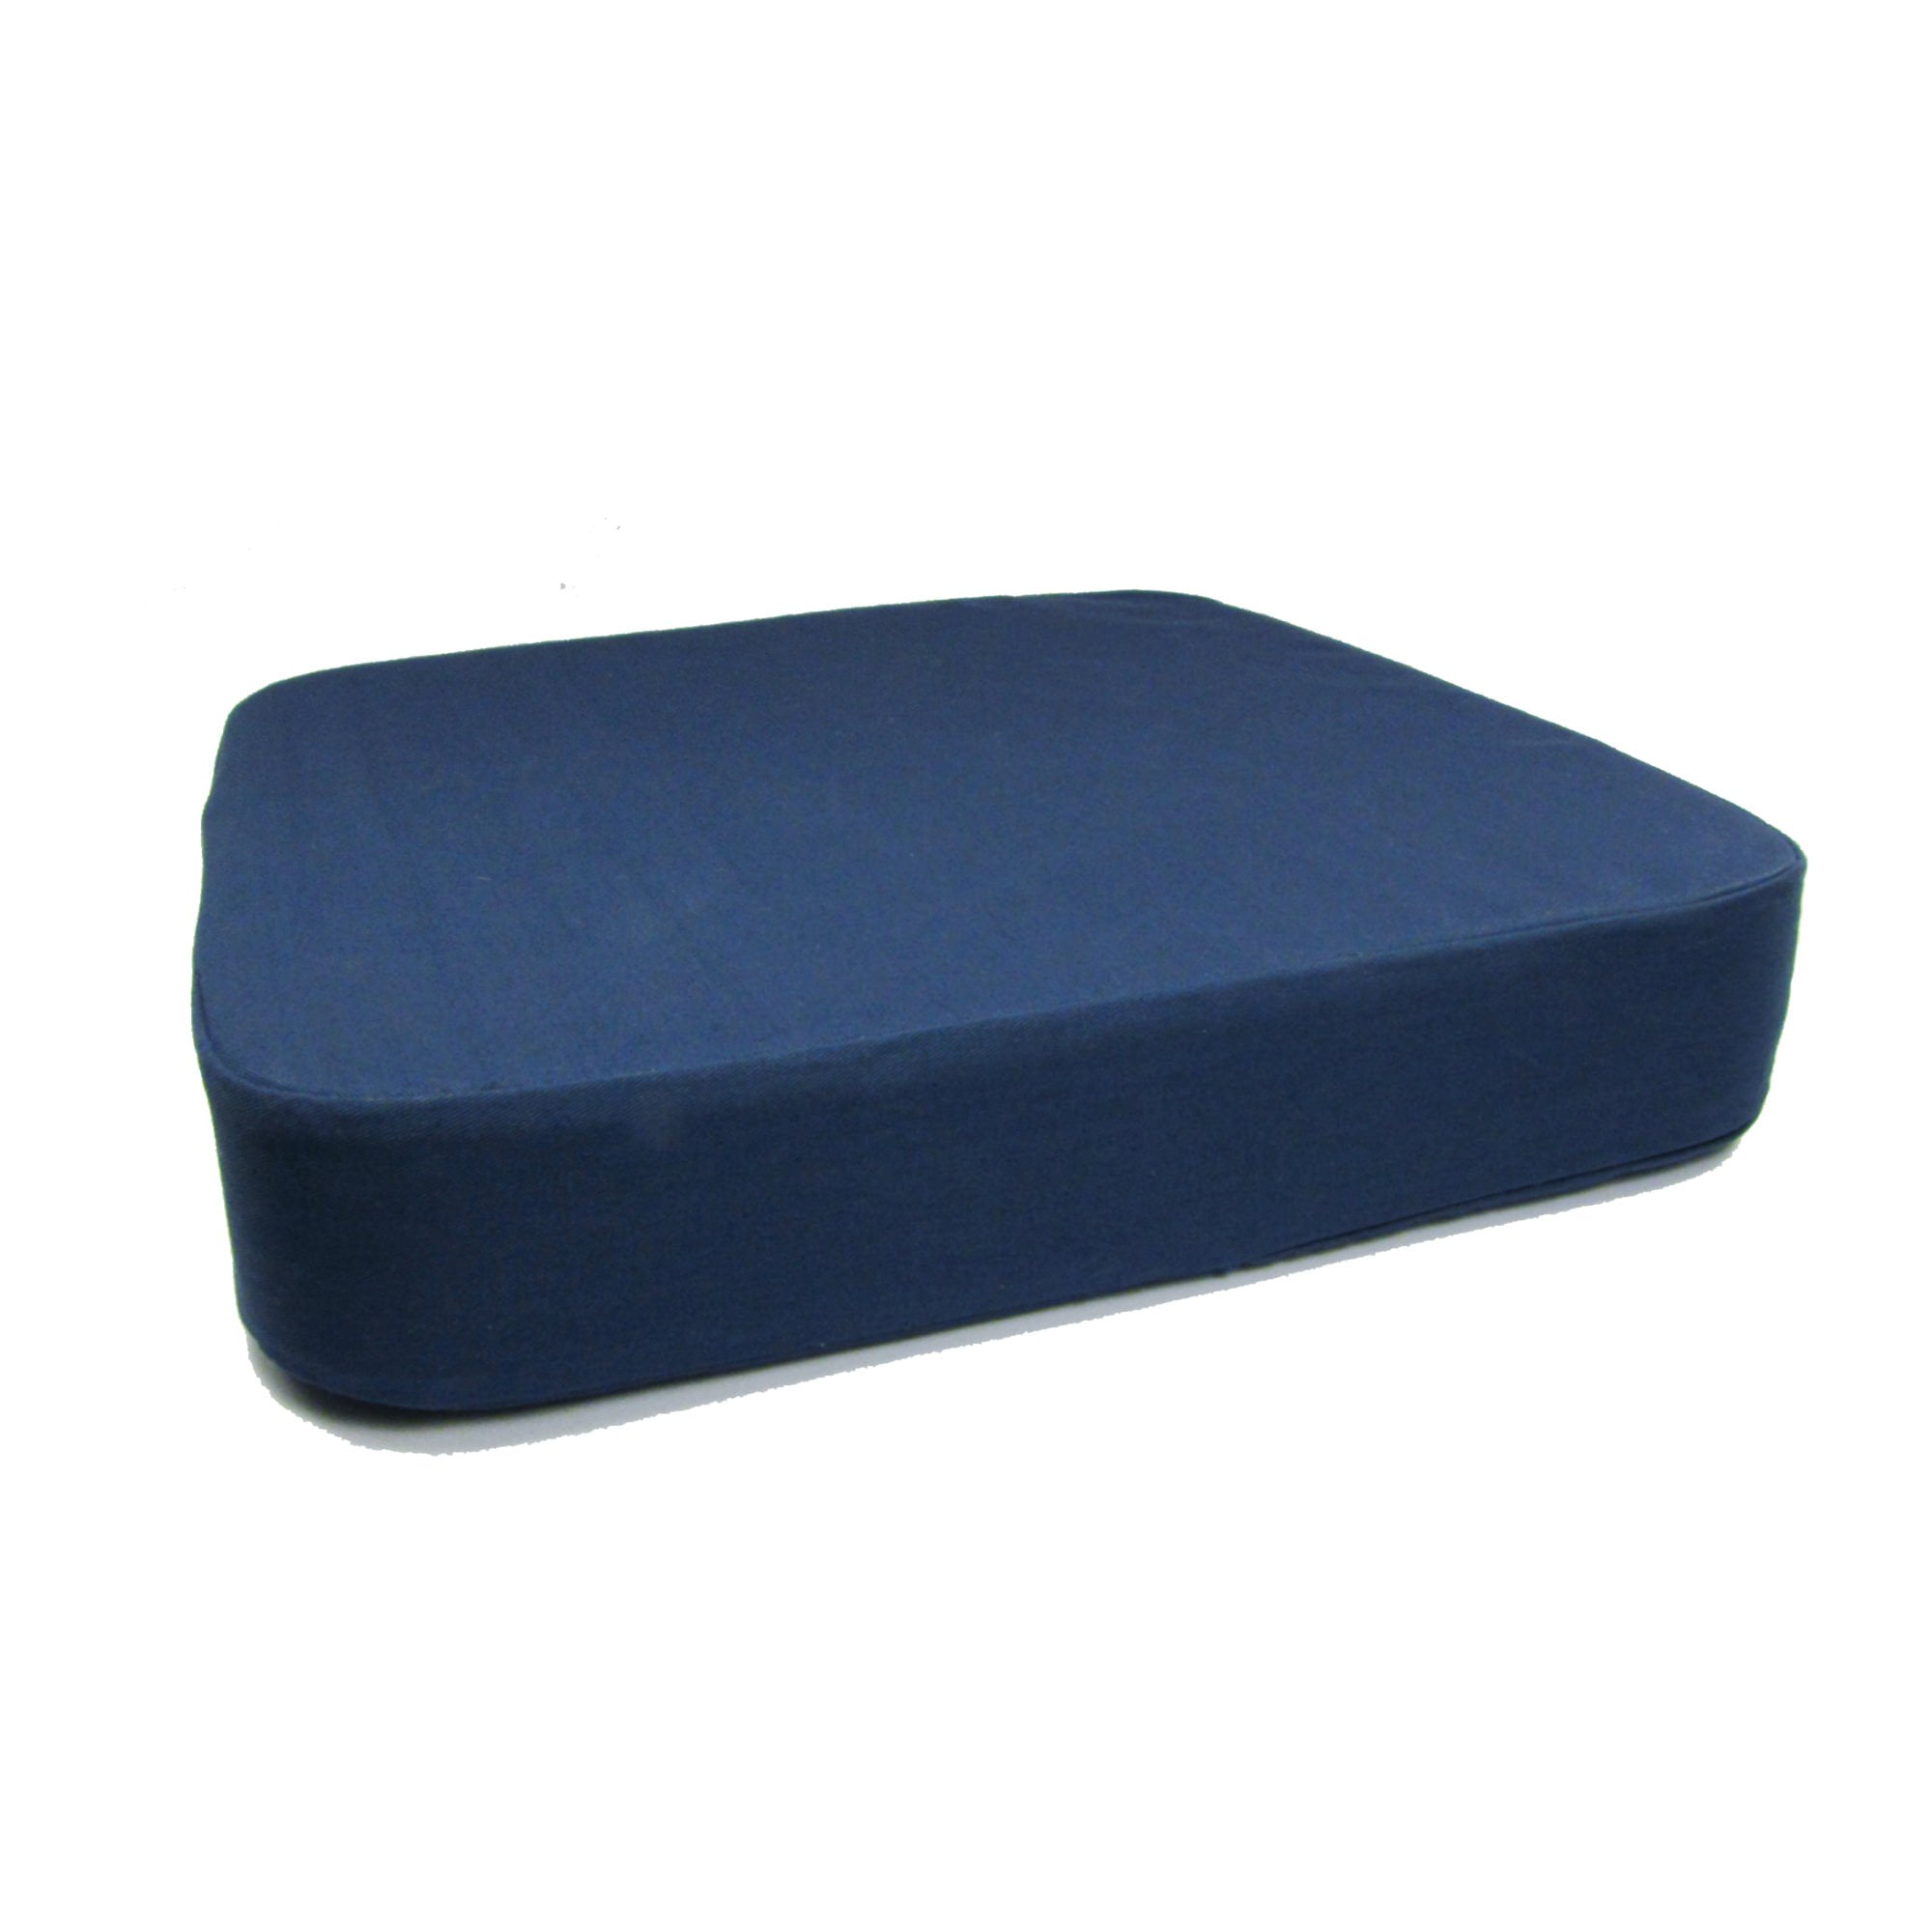 Extra Thick Foam Cushion, Large by LivingSURE™